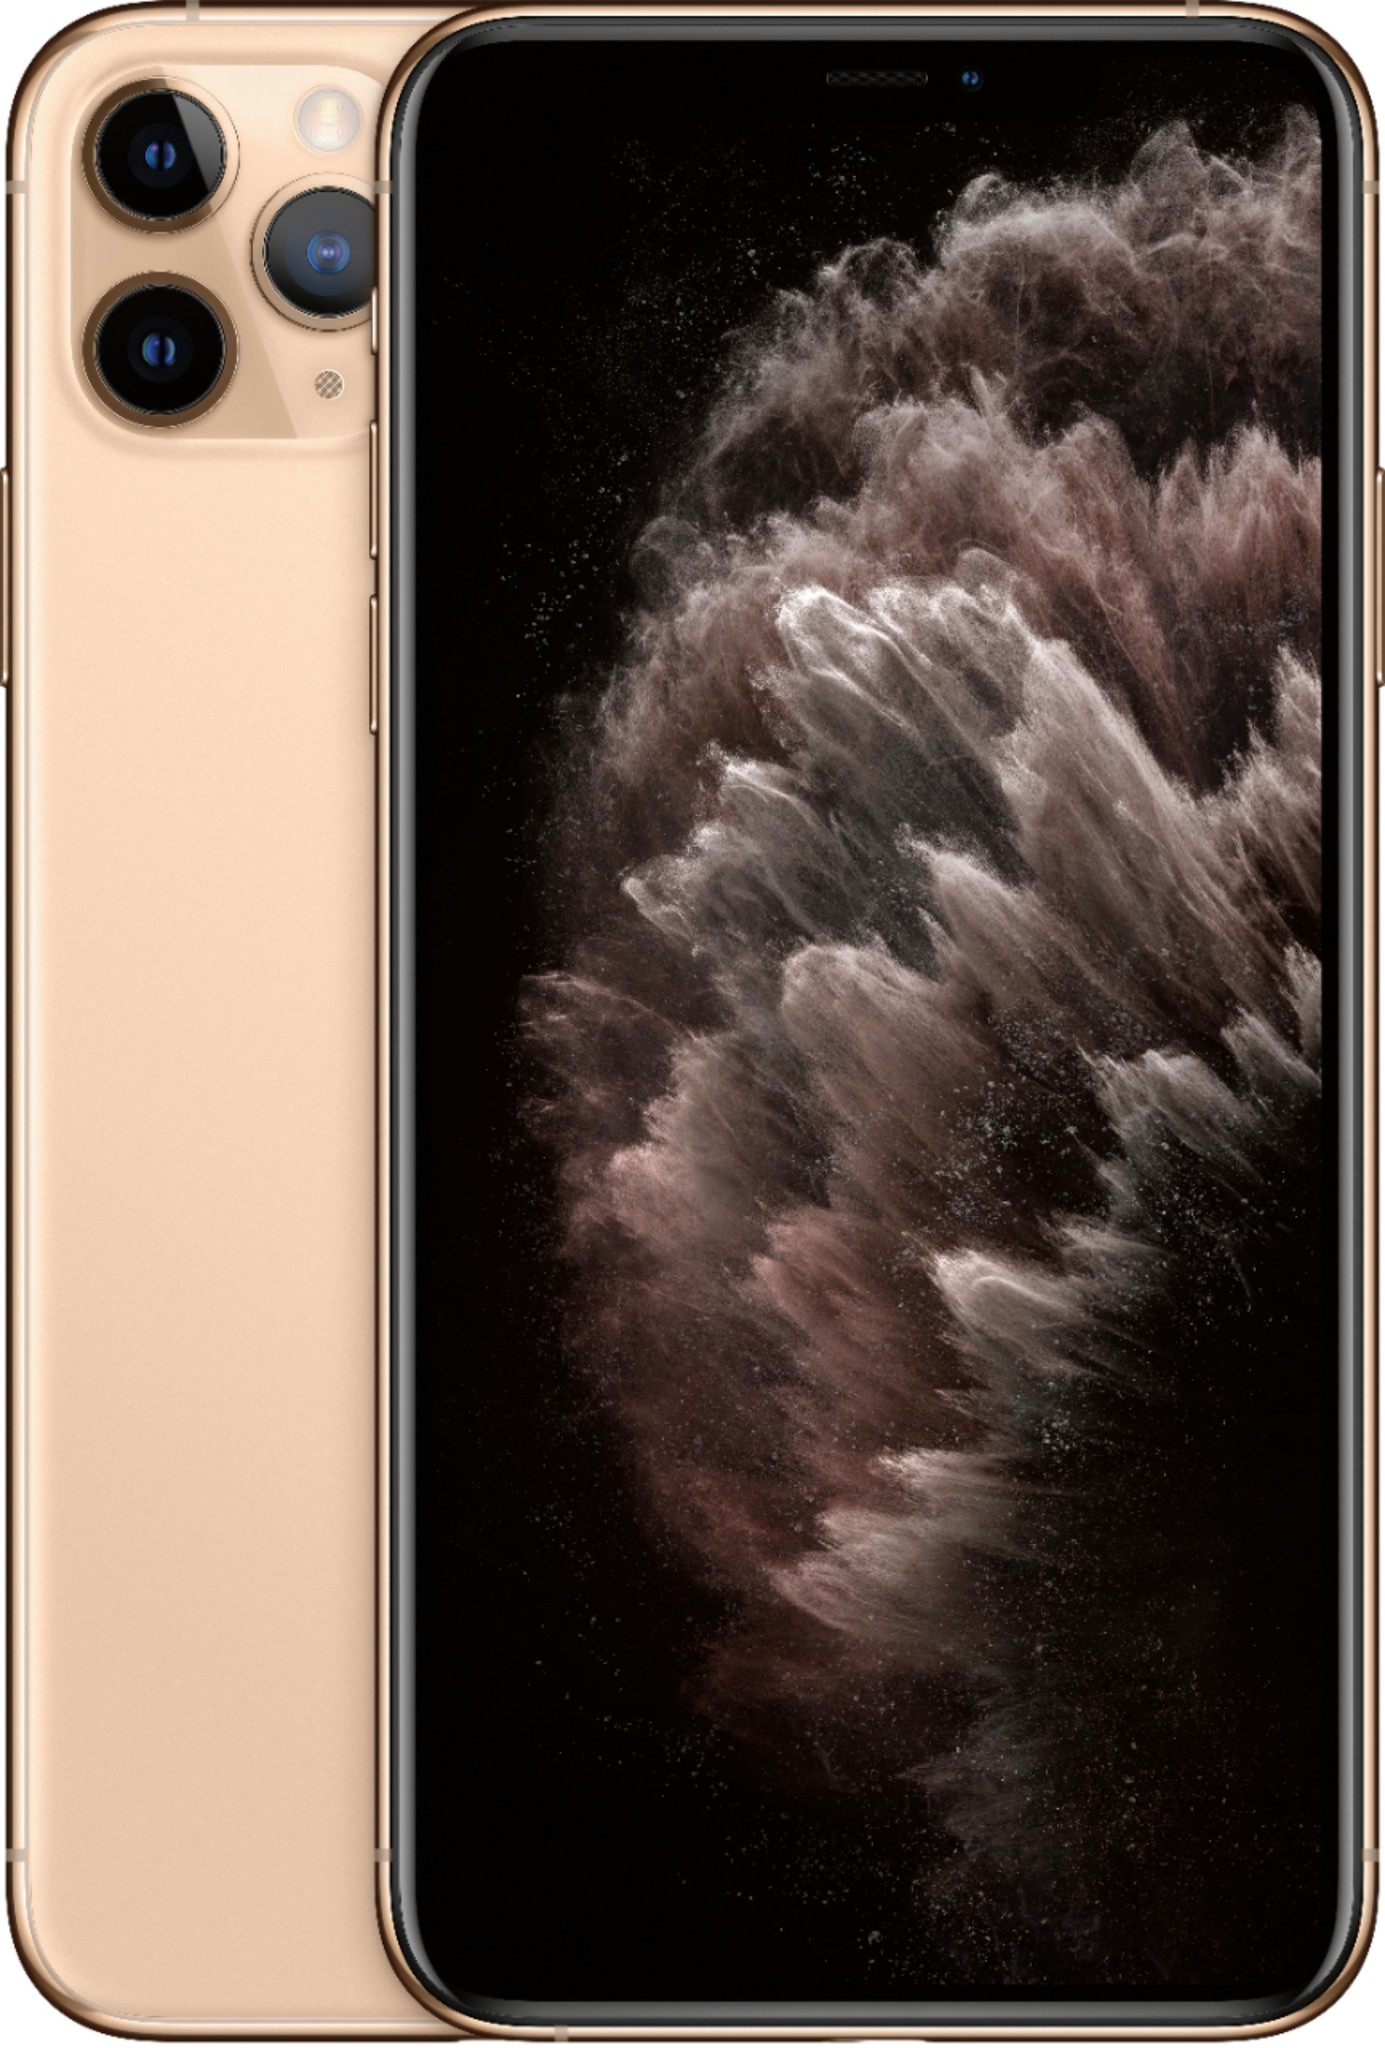 Apple iPhone 11 Pro - 256GB -Unlocked - Gold - Best Deal in Town